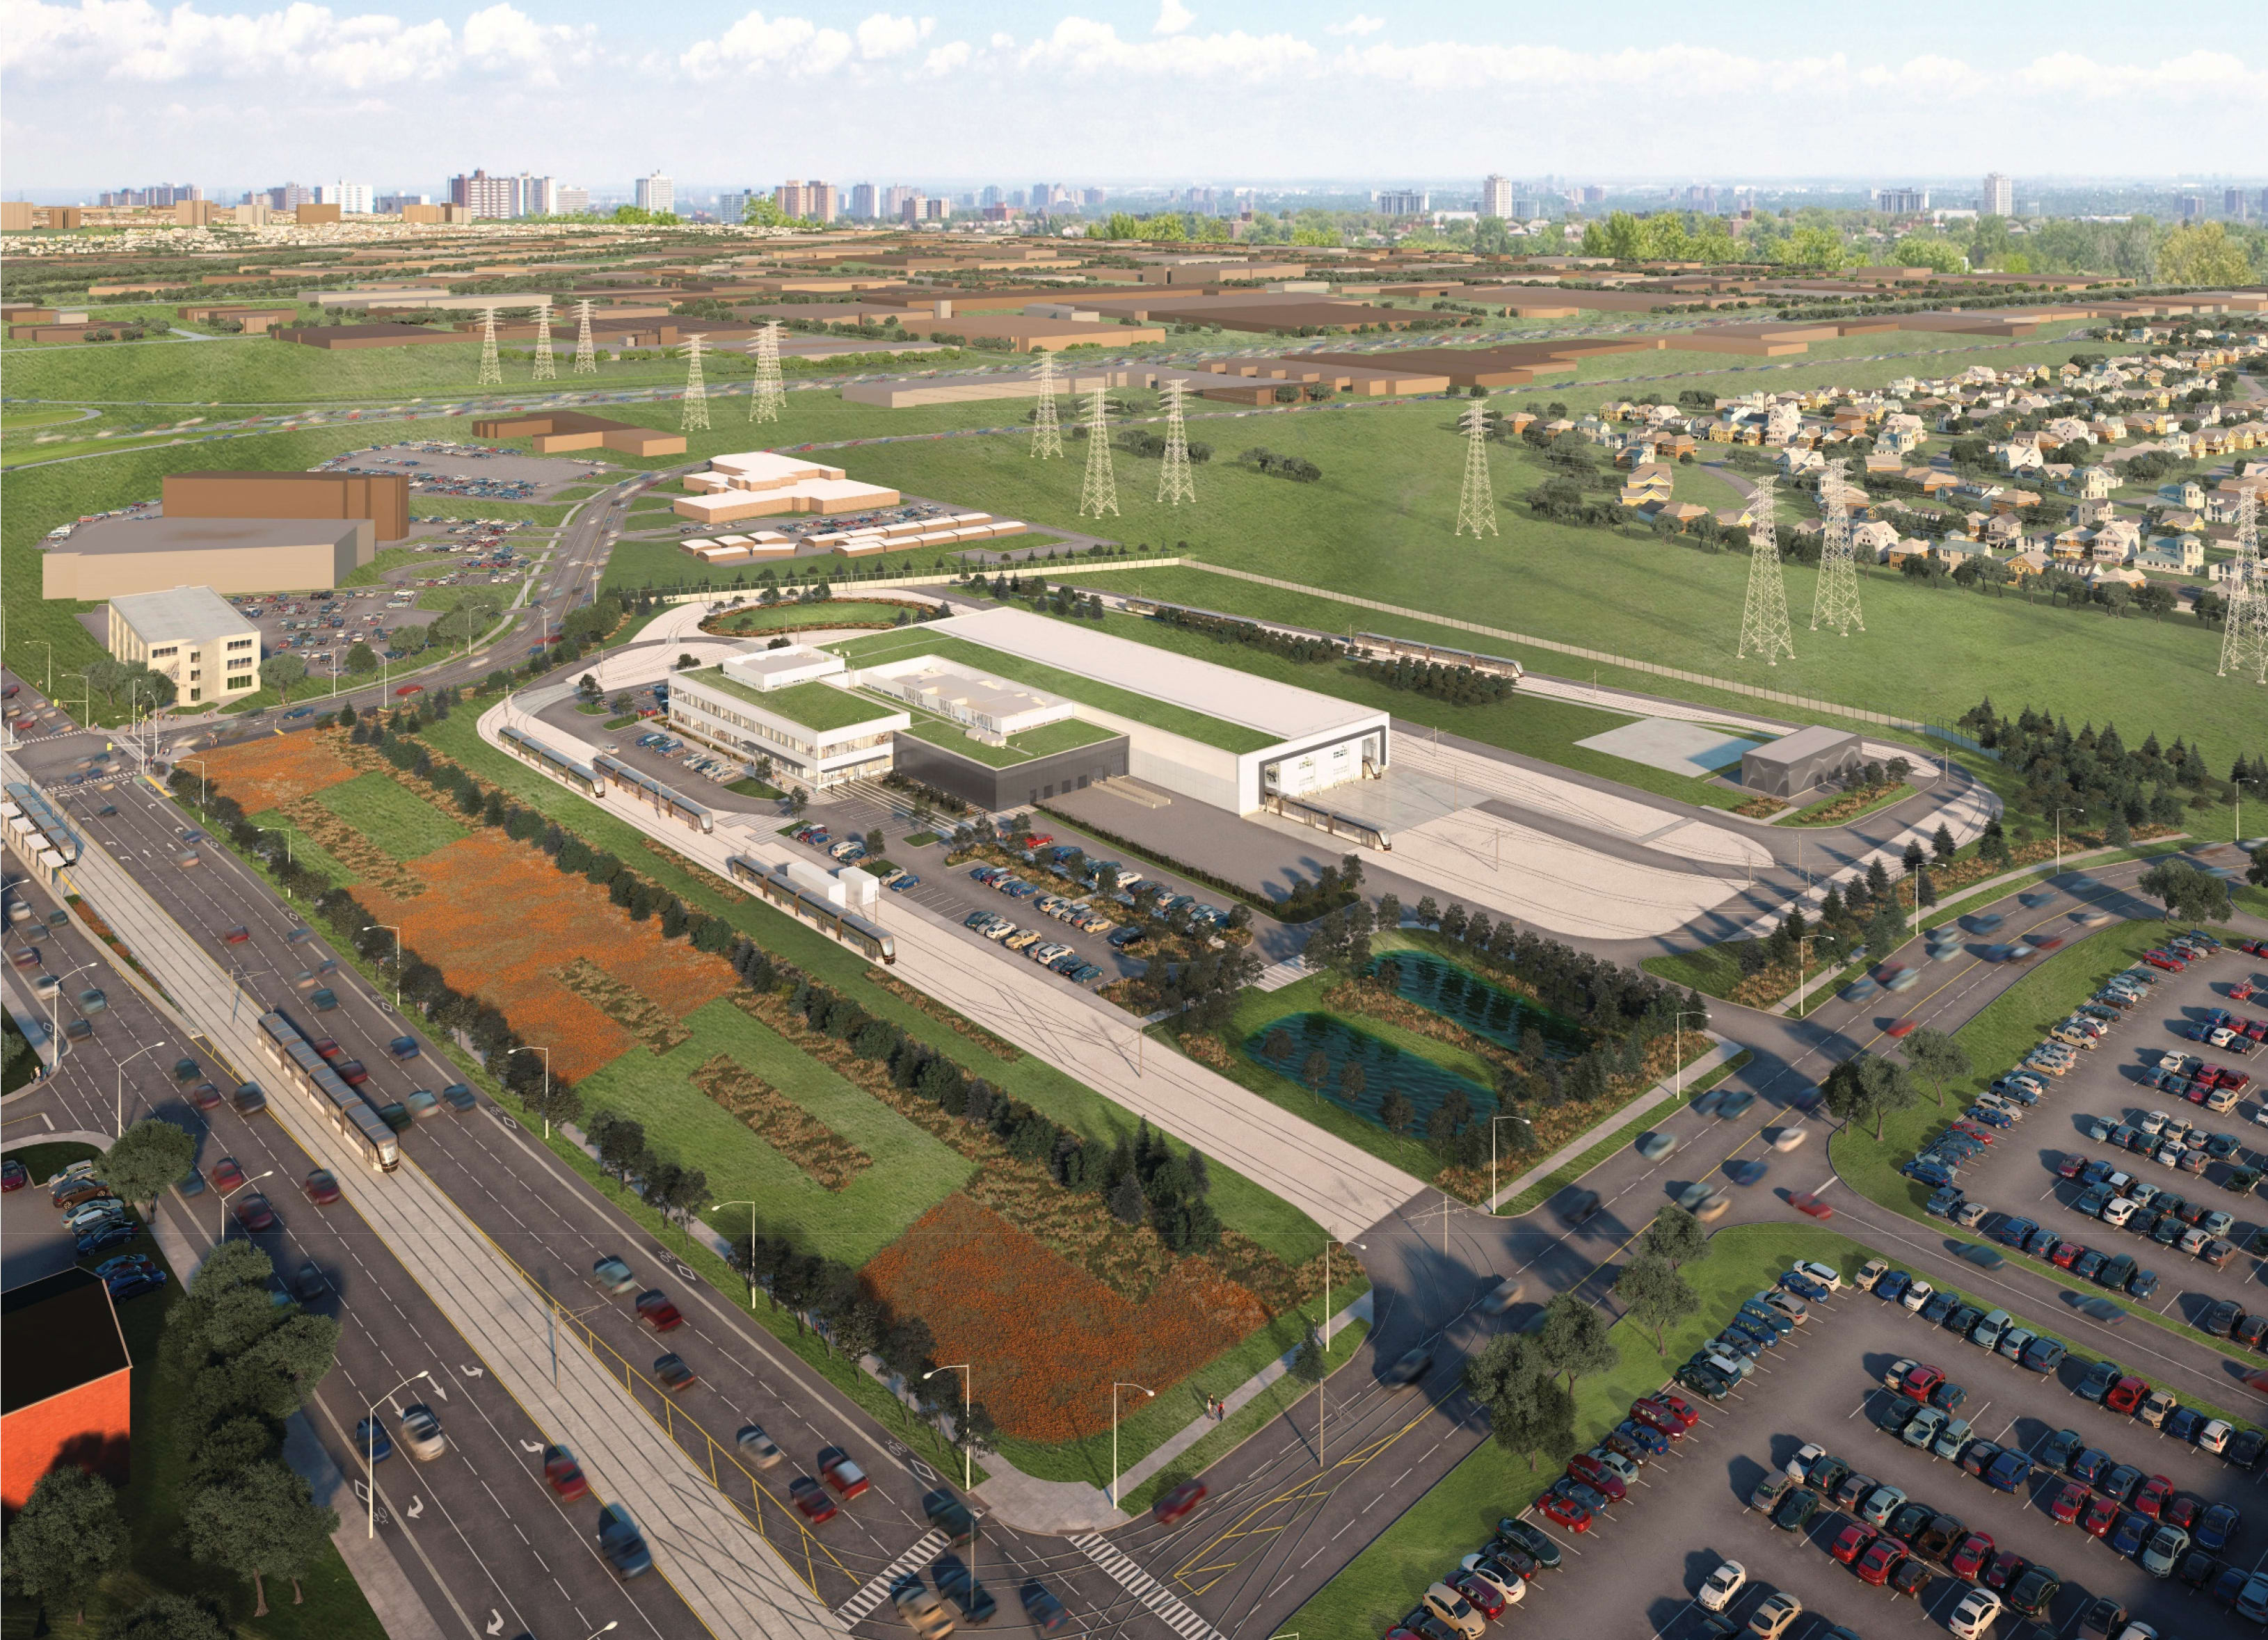 Rendering shows a large facility, next to green space and local roadways.